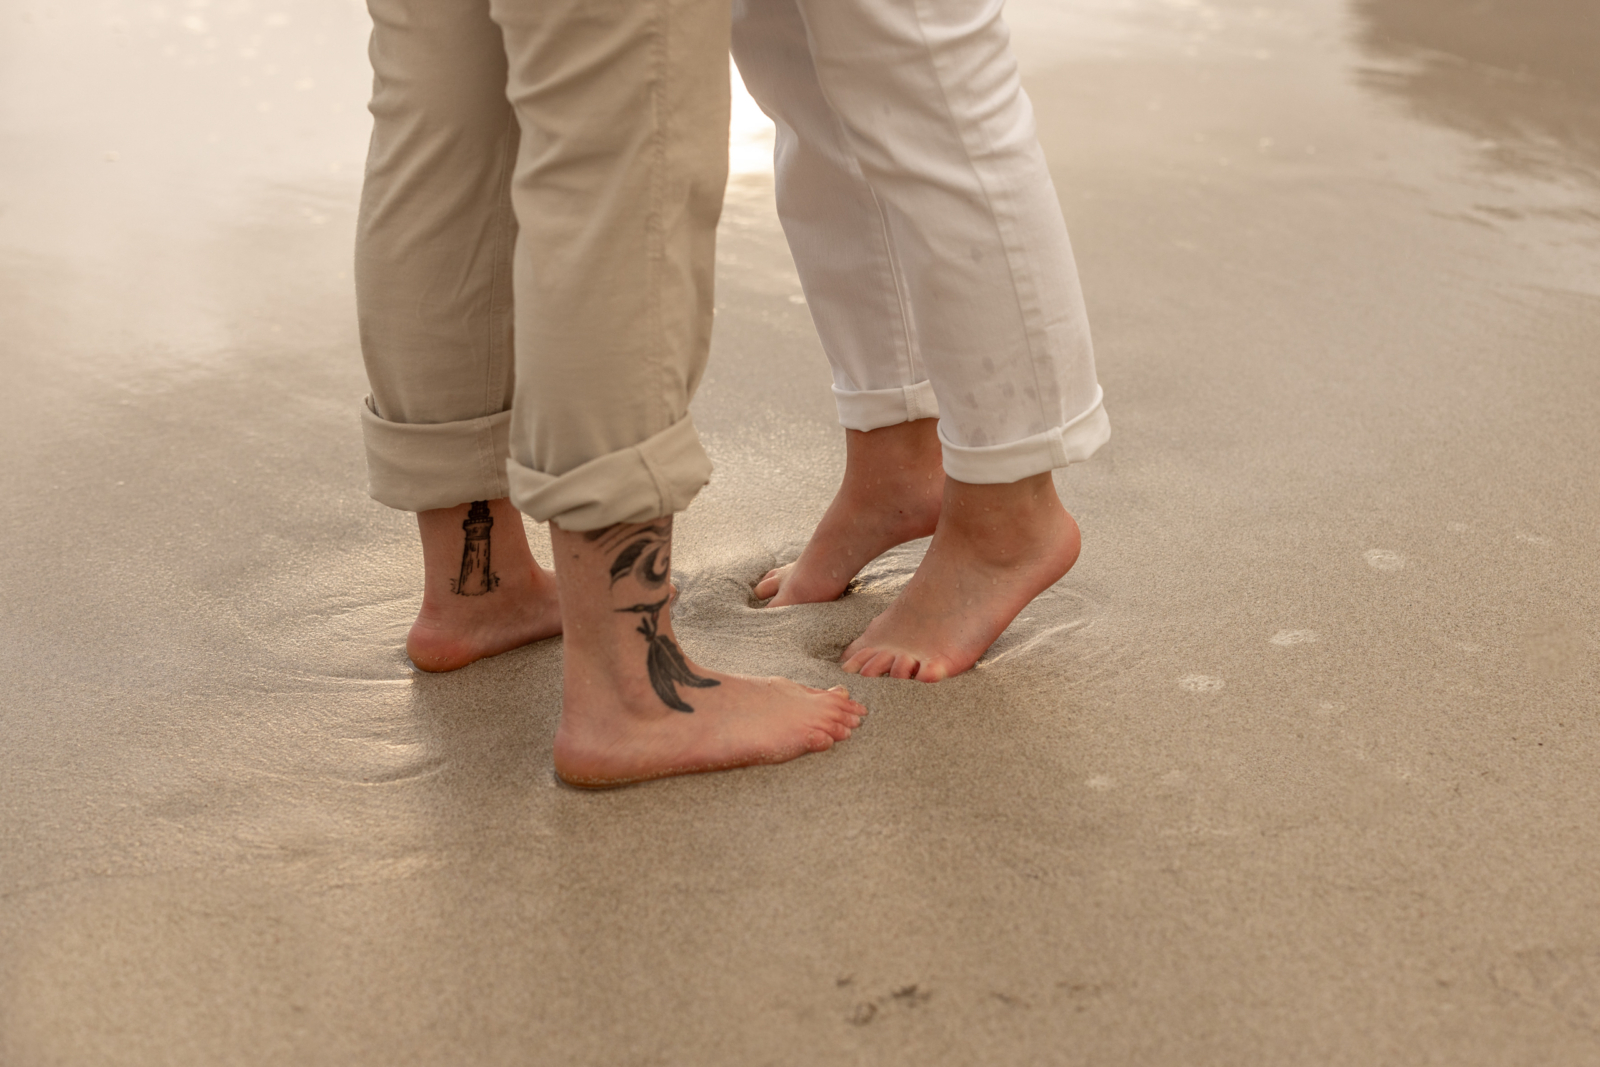 detail photo for the engagement photos at the beach